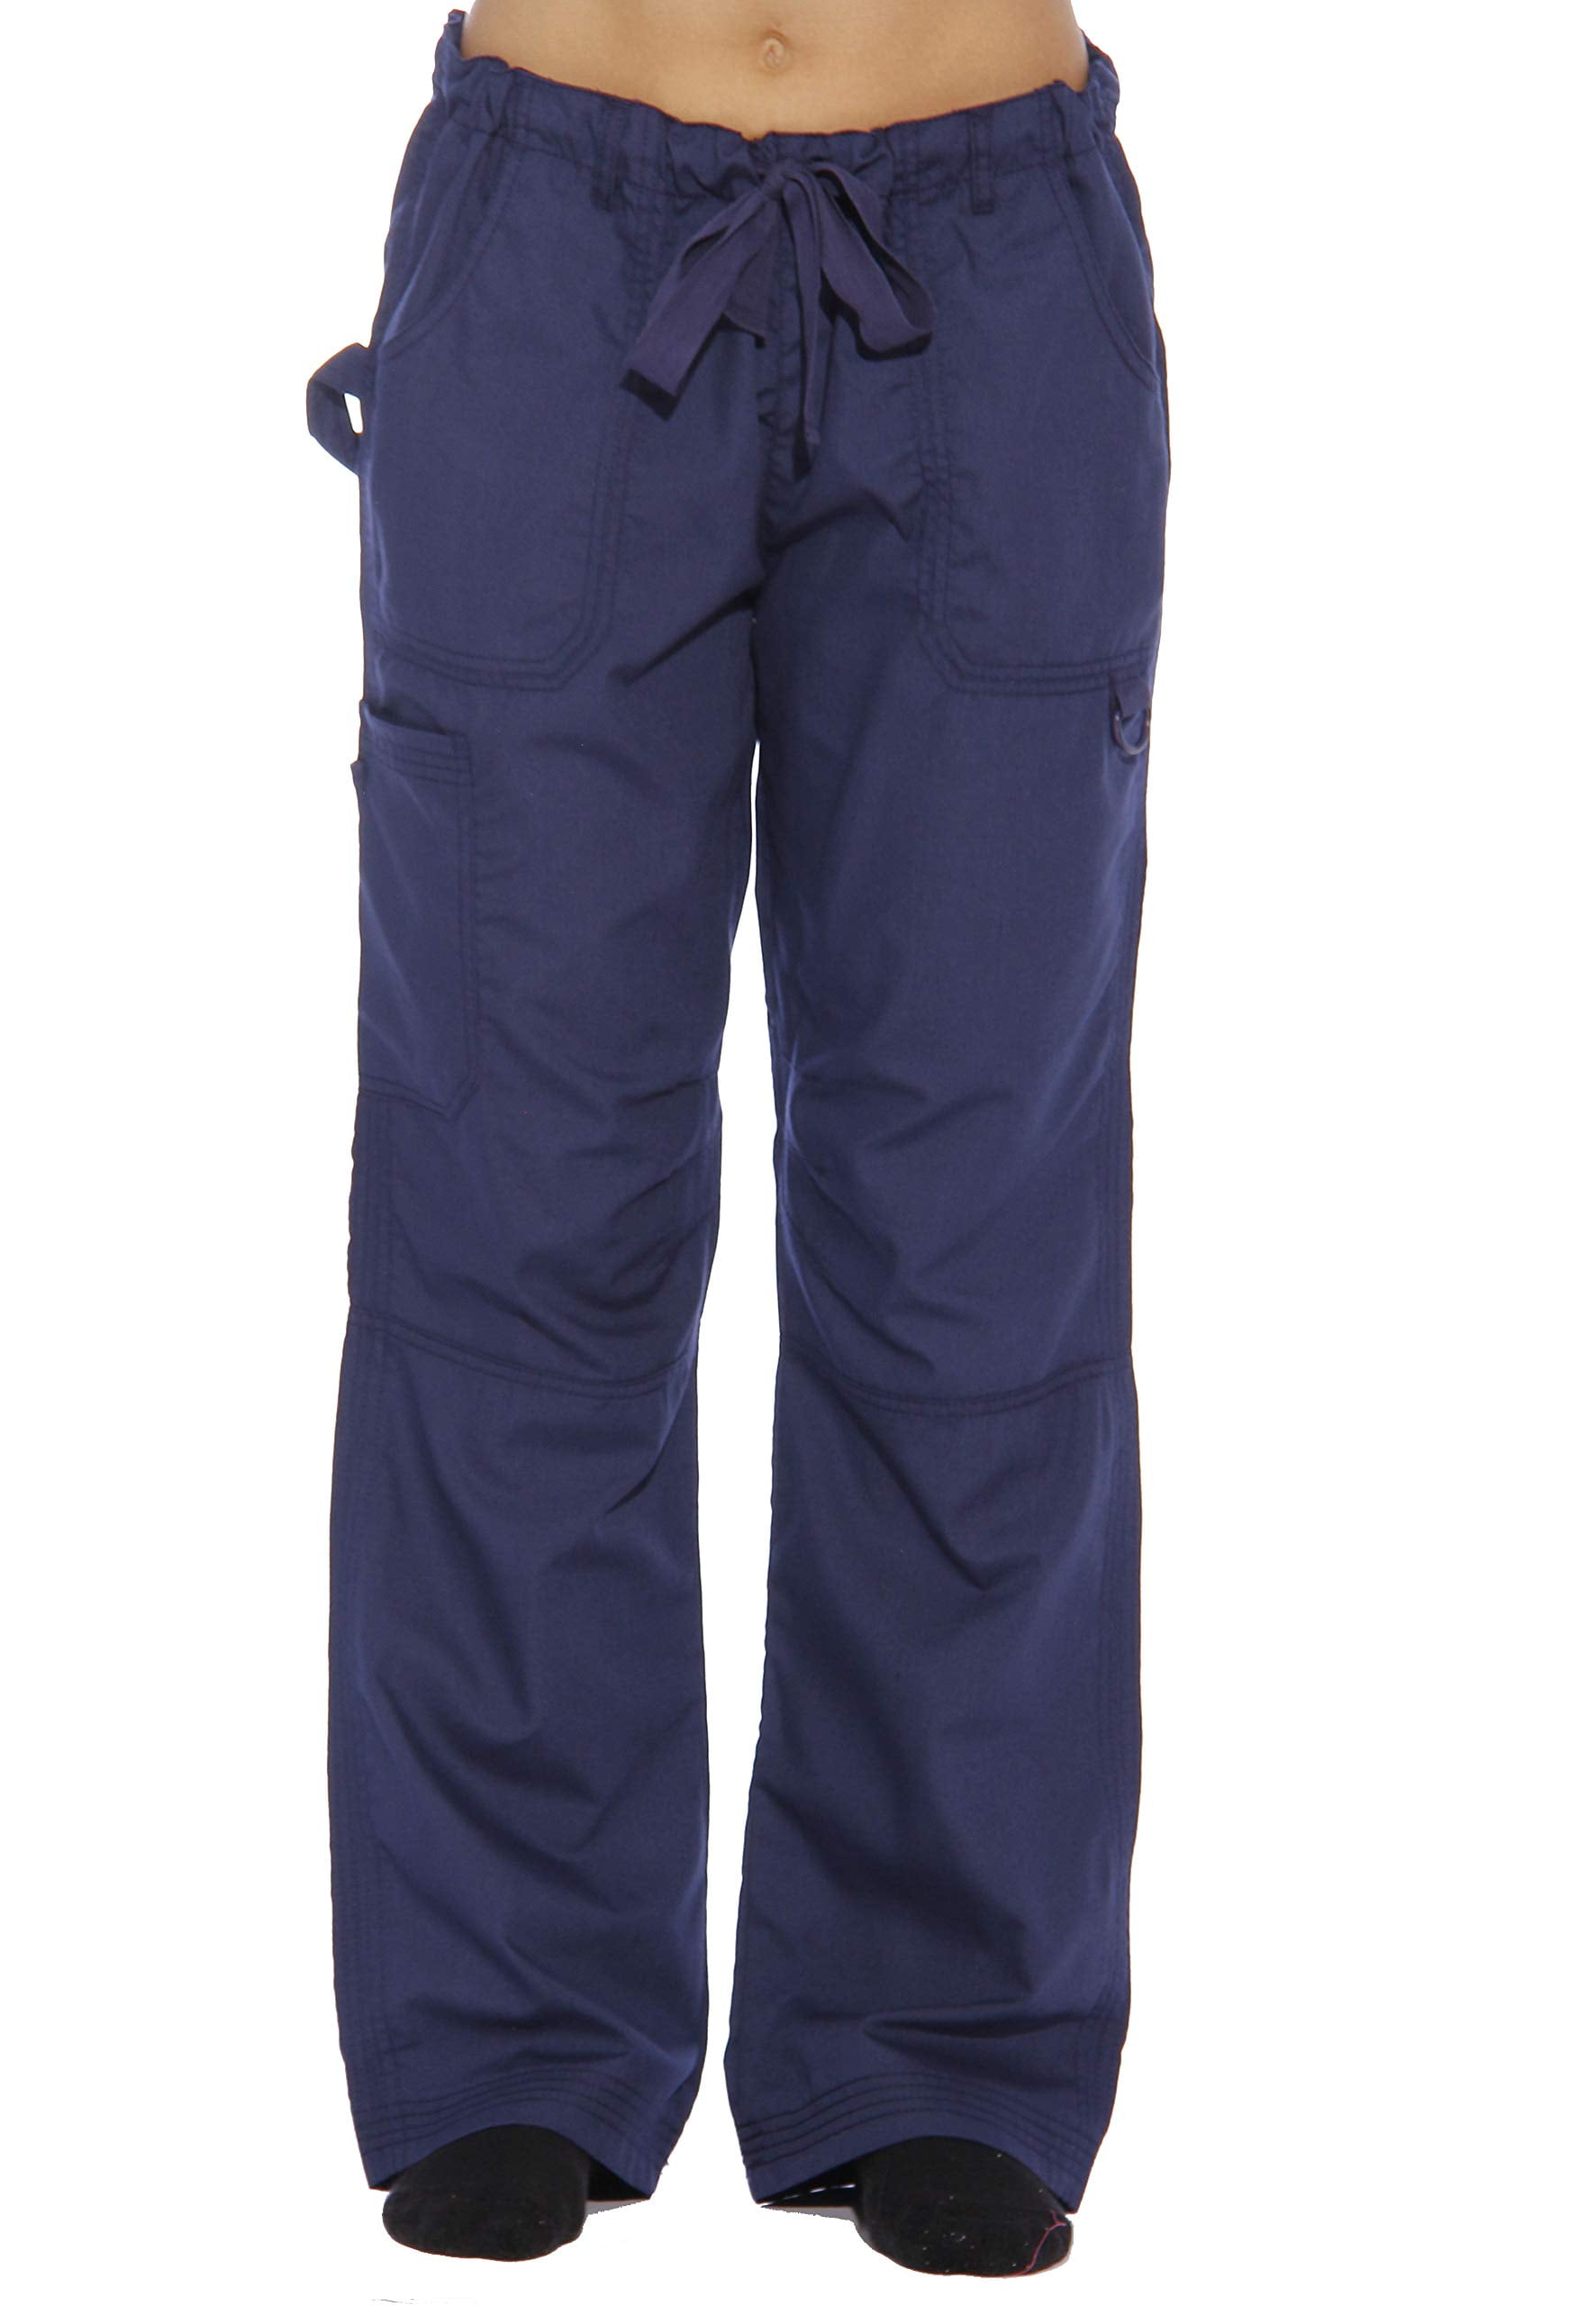 Just Love Women's Solid Utility Scrub Pants - Comfortable and Durable ...